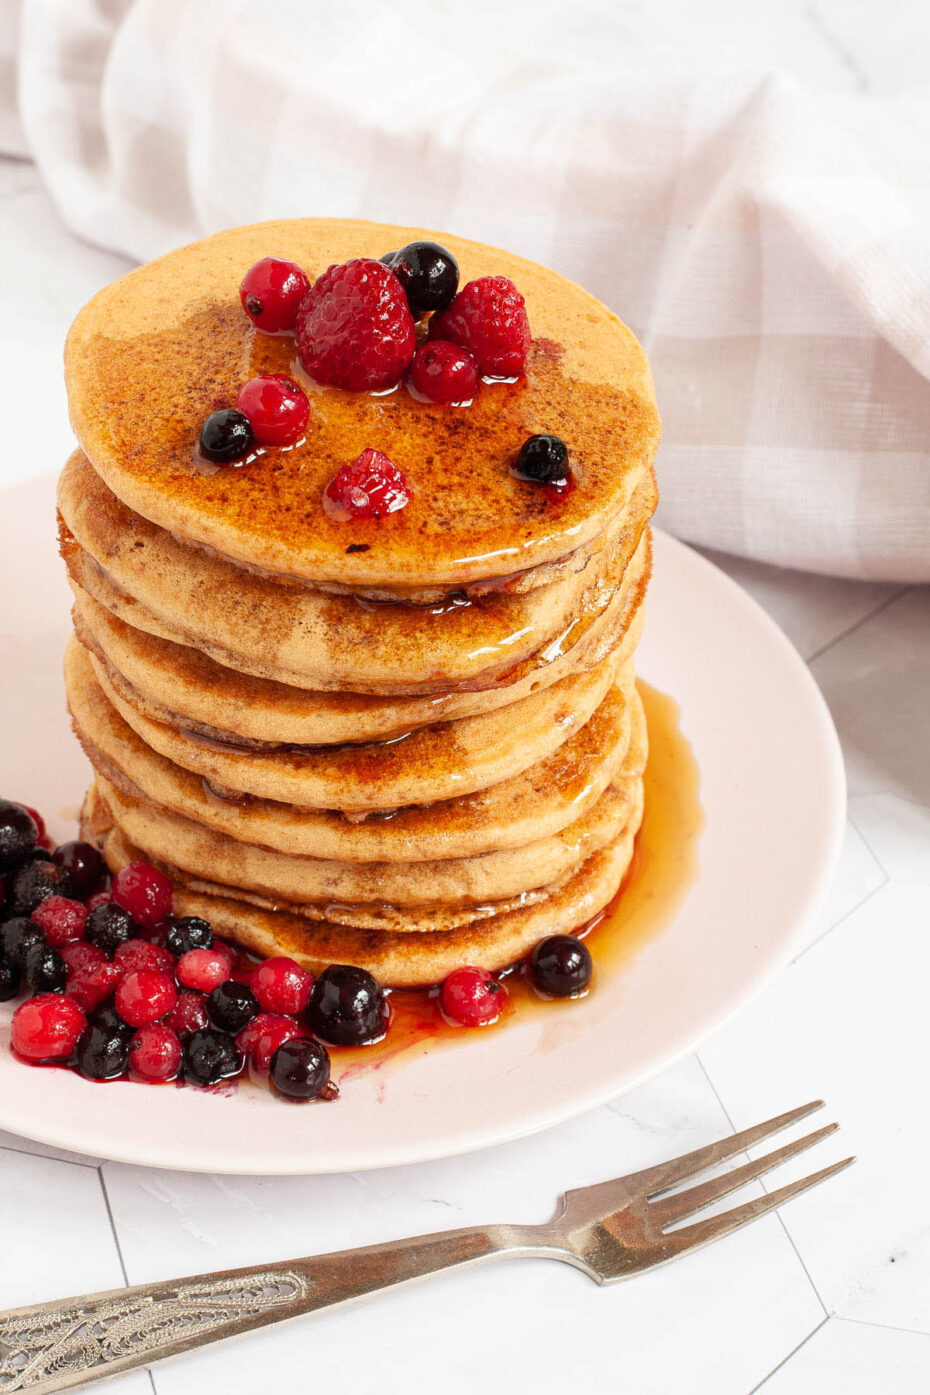 Pink plate with a stack of pancakes topped with black and red berries and maple syrup